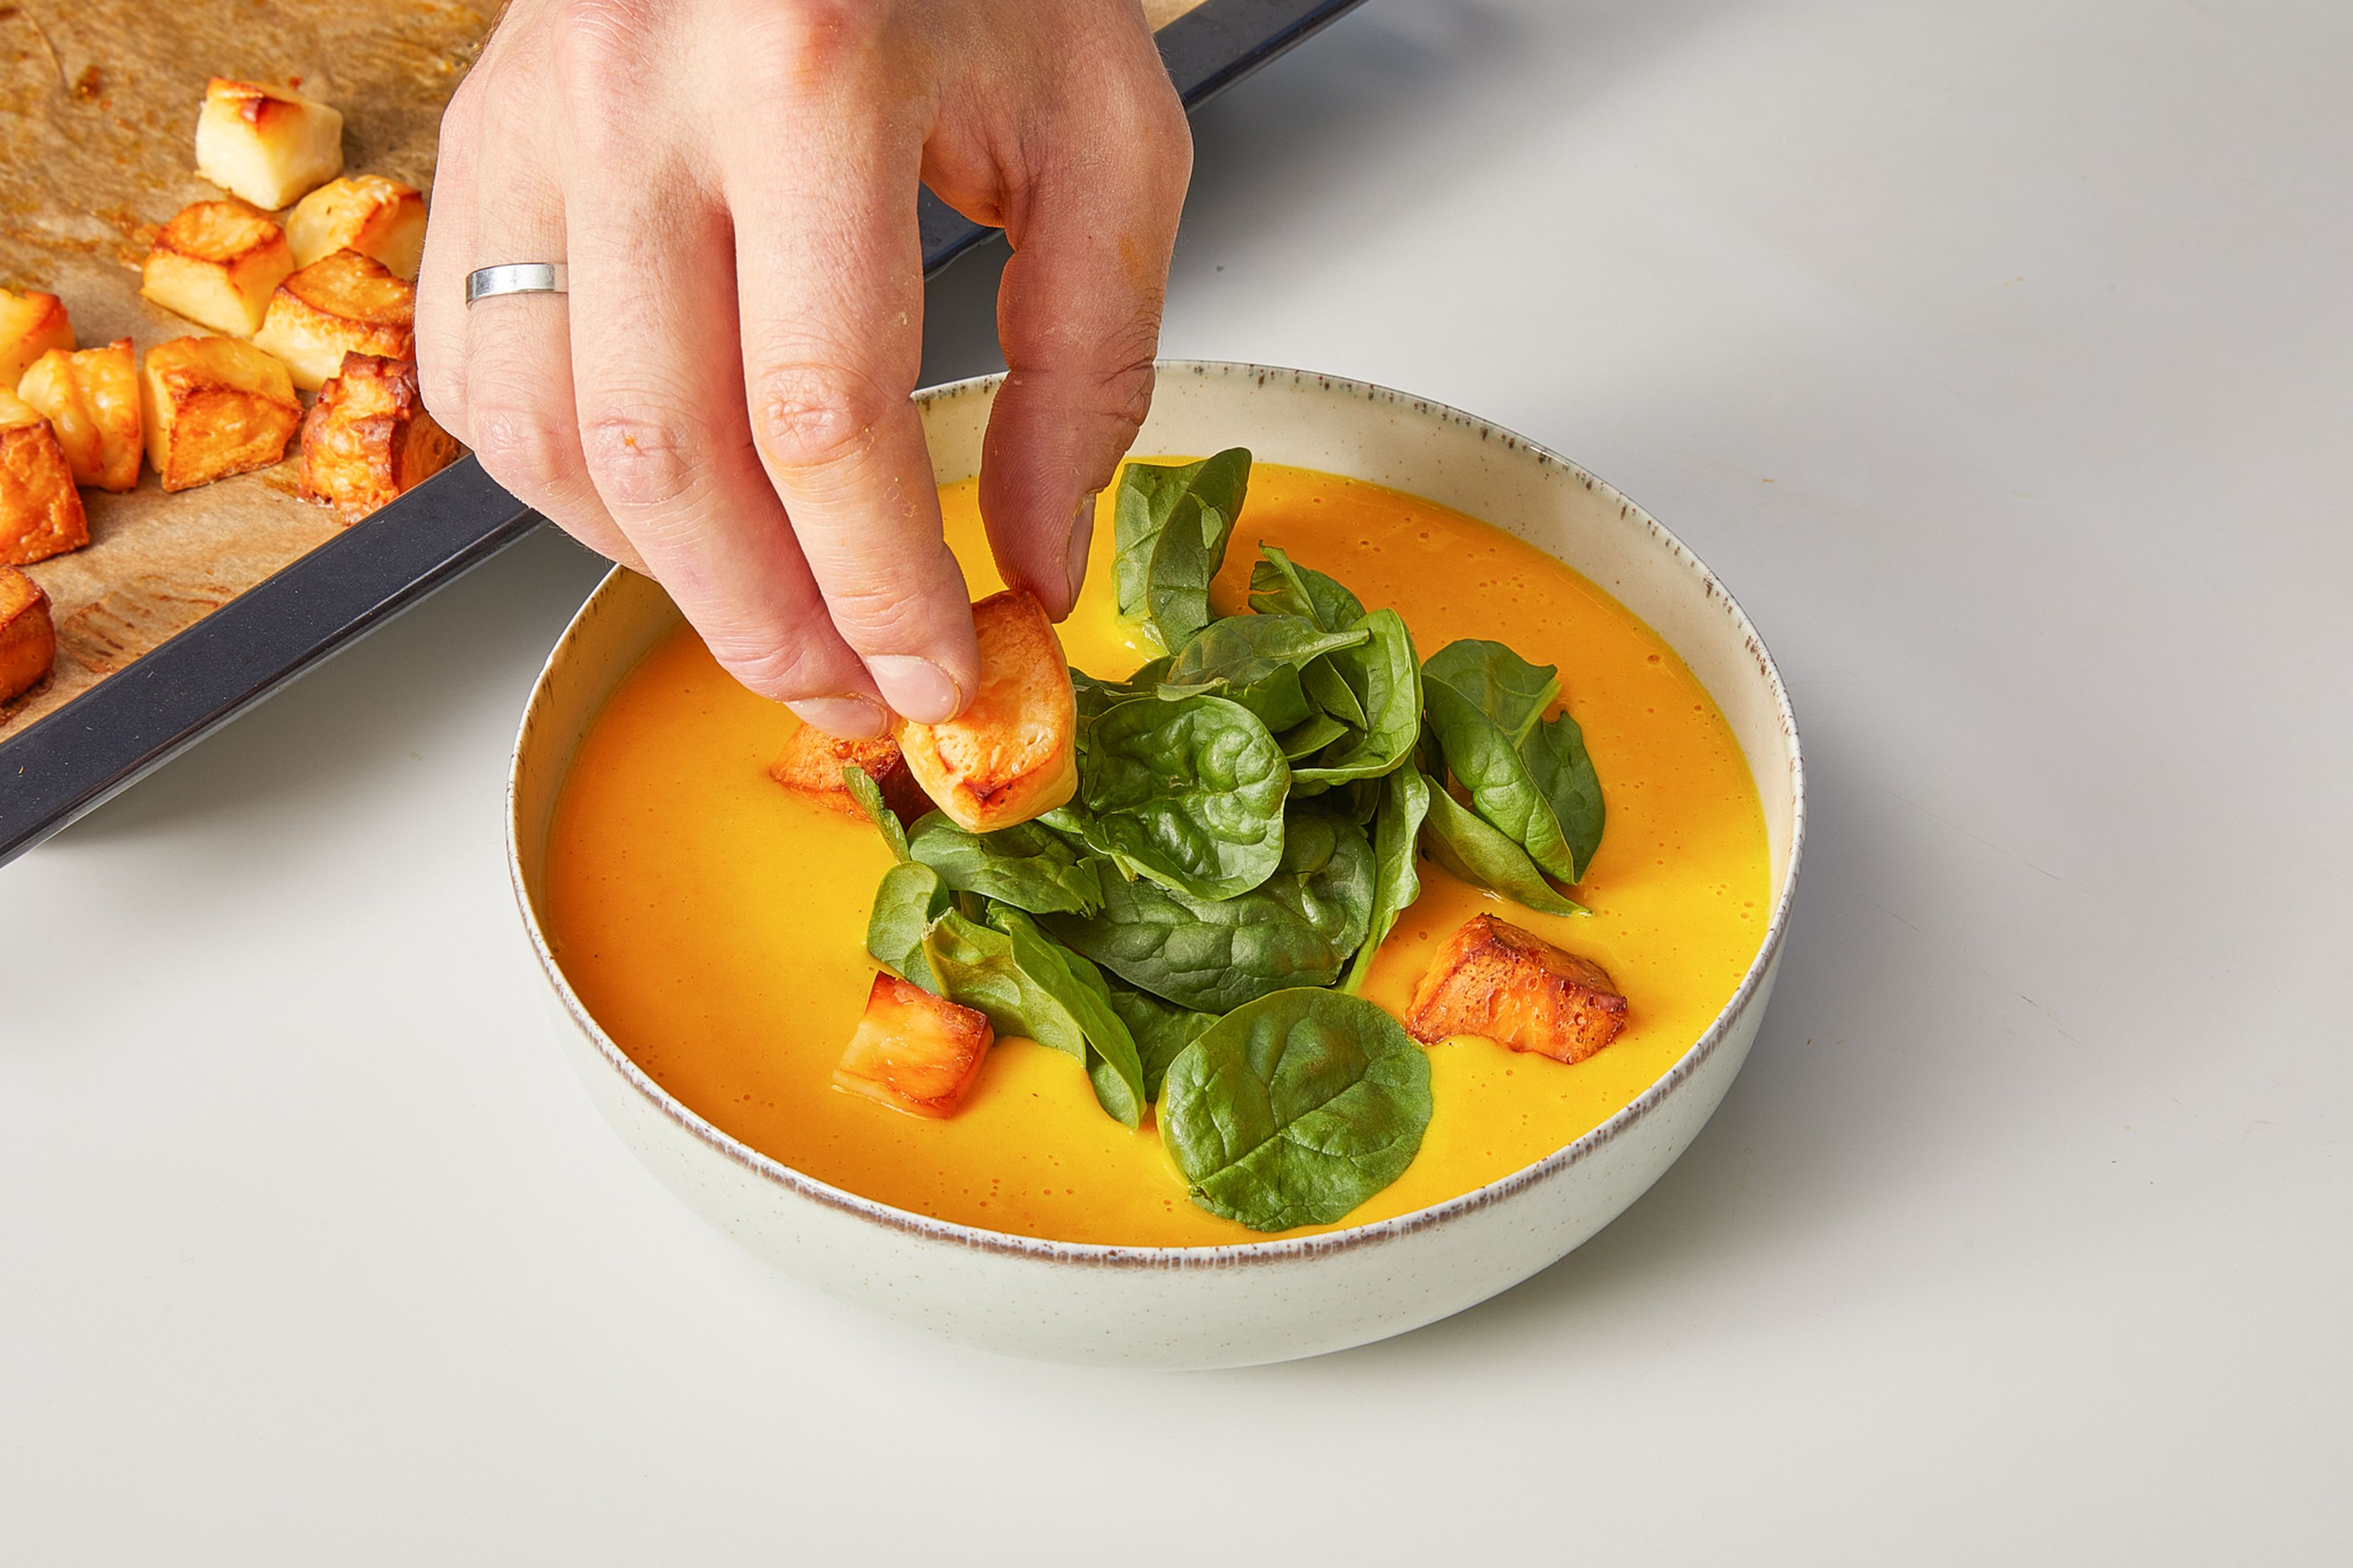 Once the soup has reached the desired consistency, pour into serving bowls. Place a handful of baby spinach in the center of each and top with the halloumi pieces from the oven. Garnish with chili flakes, pepper, lemon zest and a drizzle of olive oil. Serve with bread, if desired.